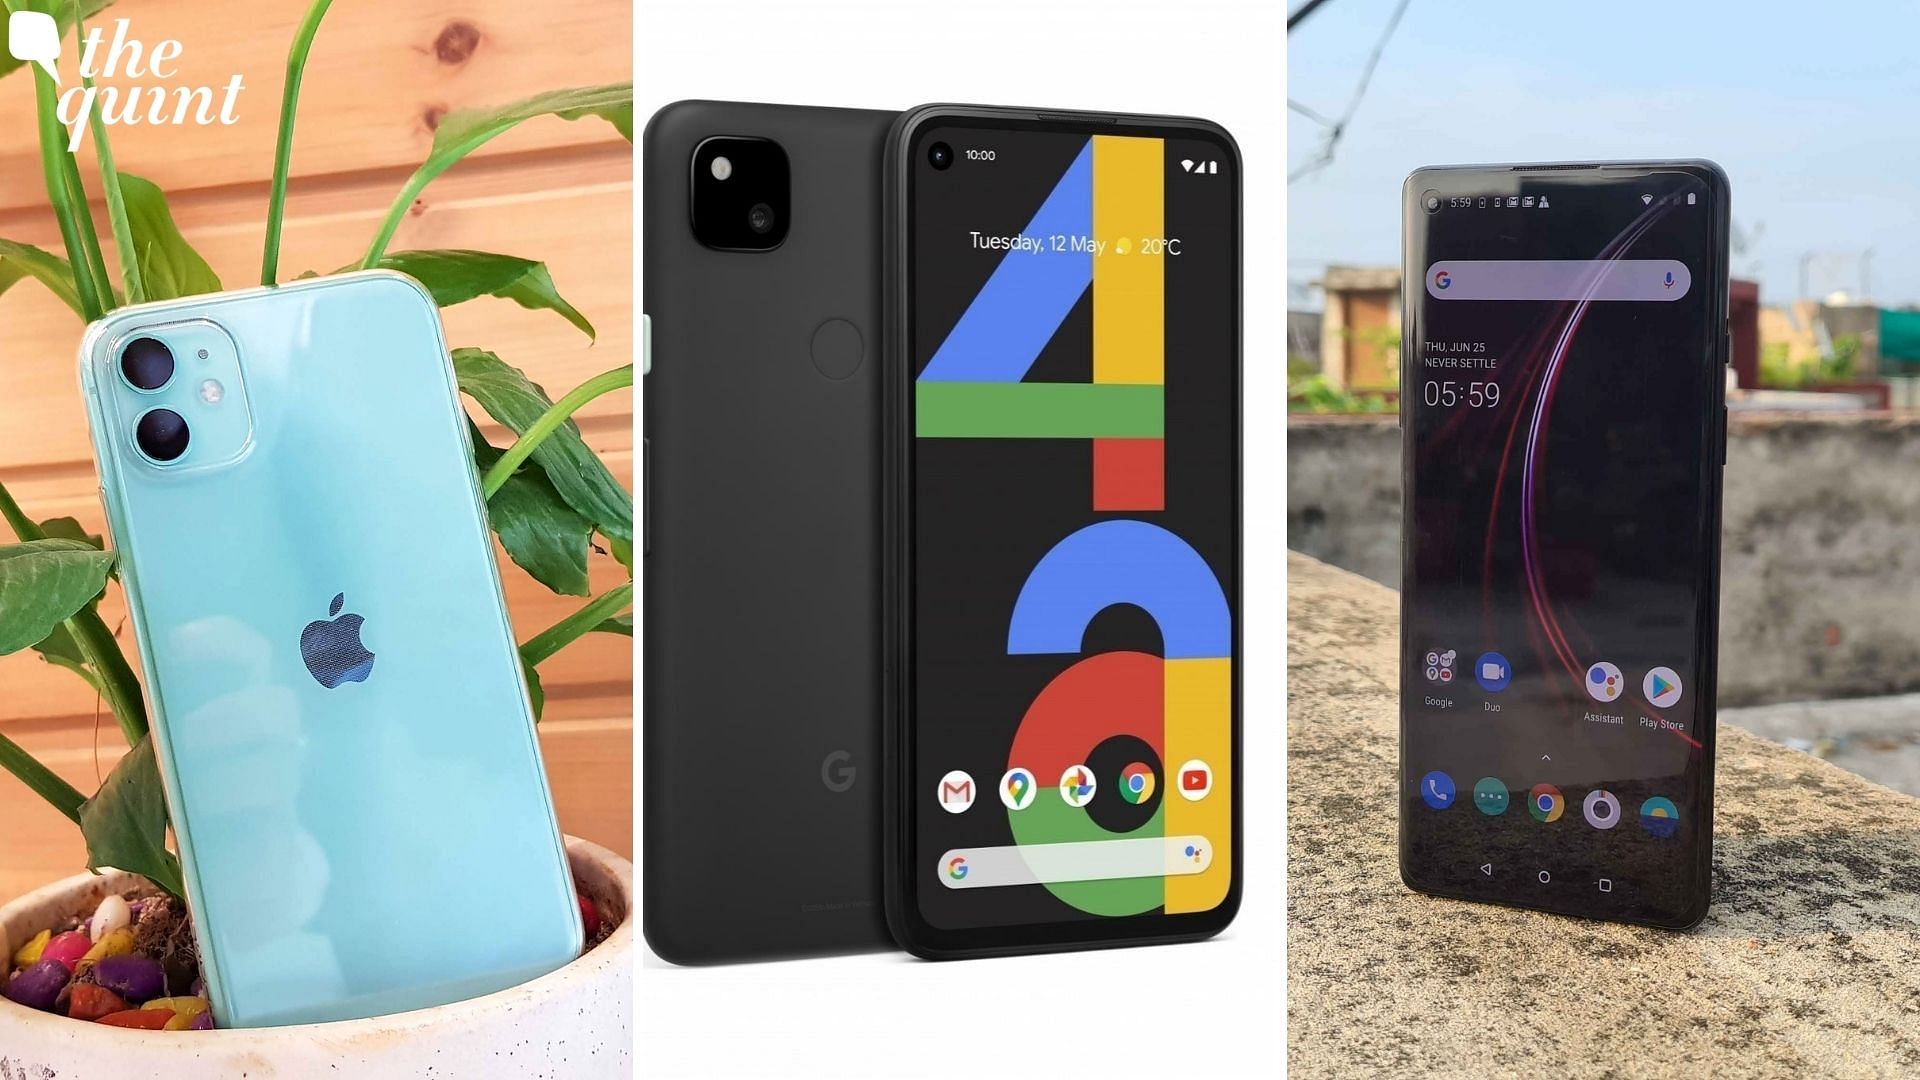 Representational images for the Apple iPhone 12, Google Pixel 4a and OnePlus 8T.